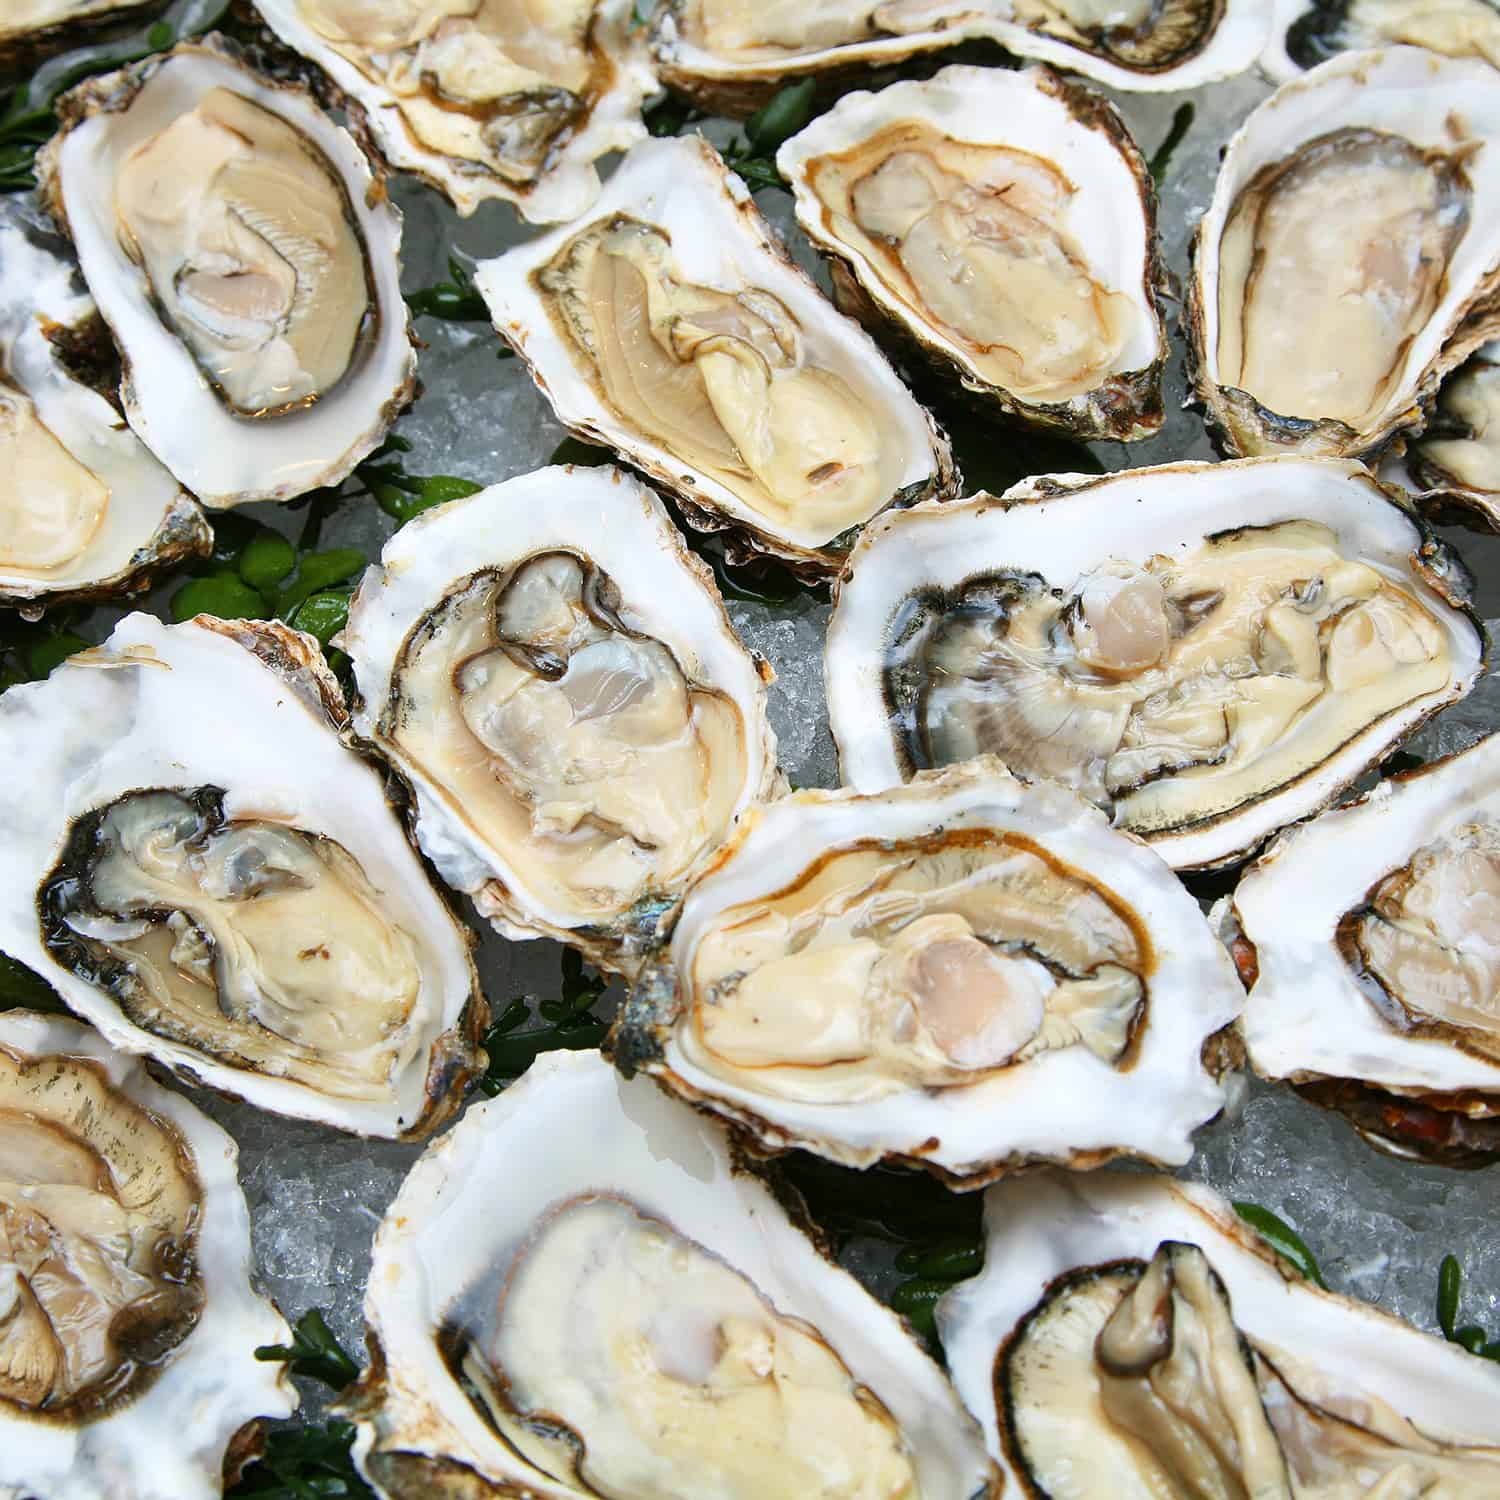 Fresh oysters from NC and Virginia